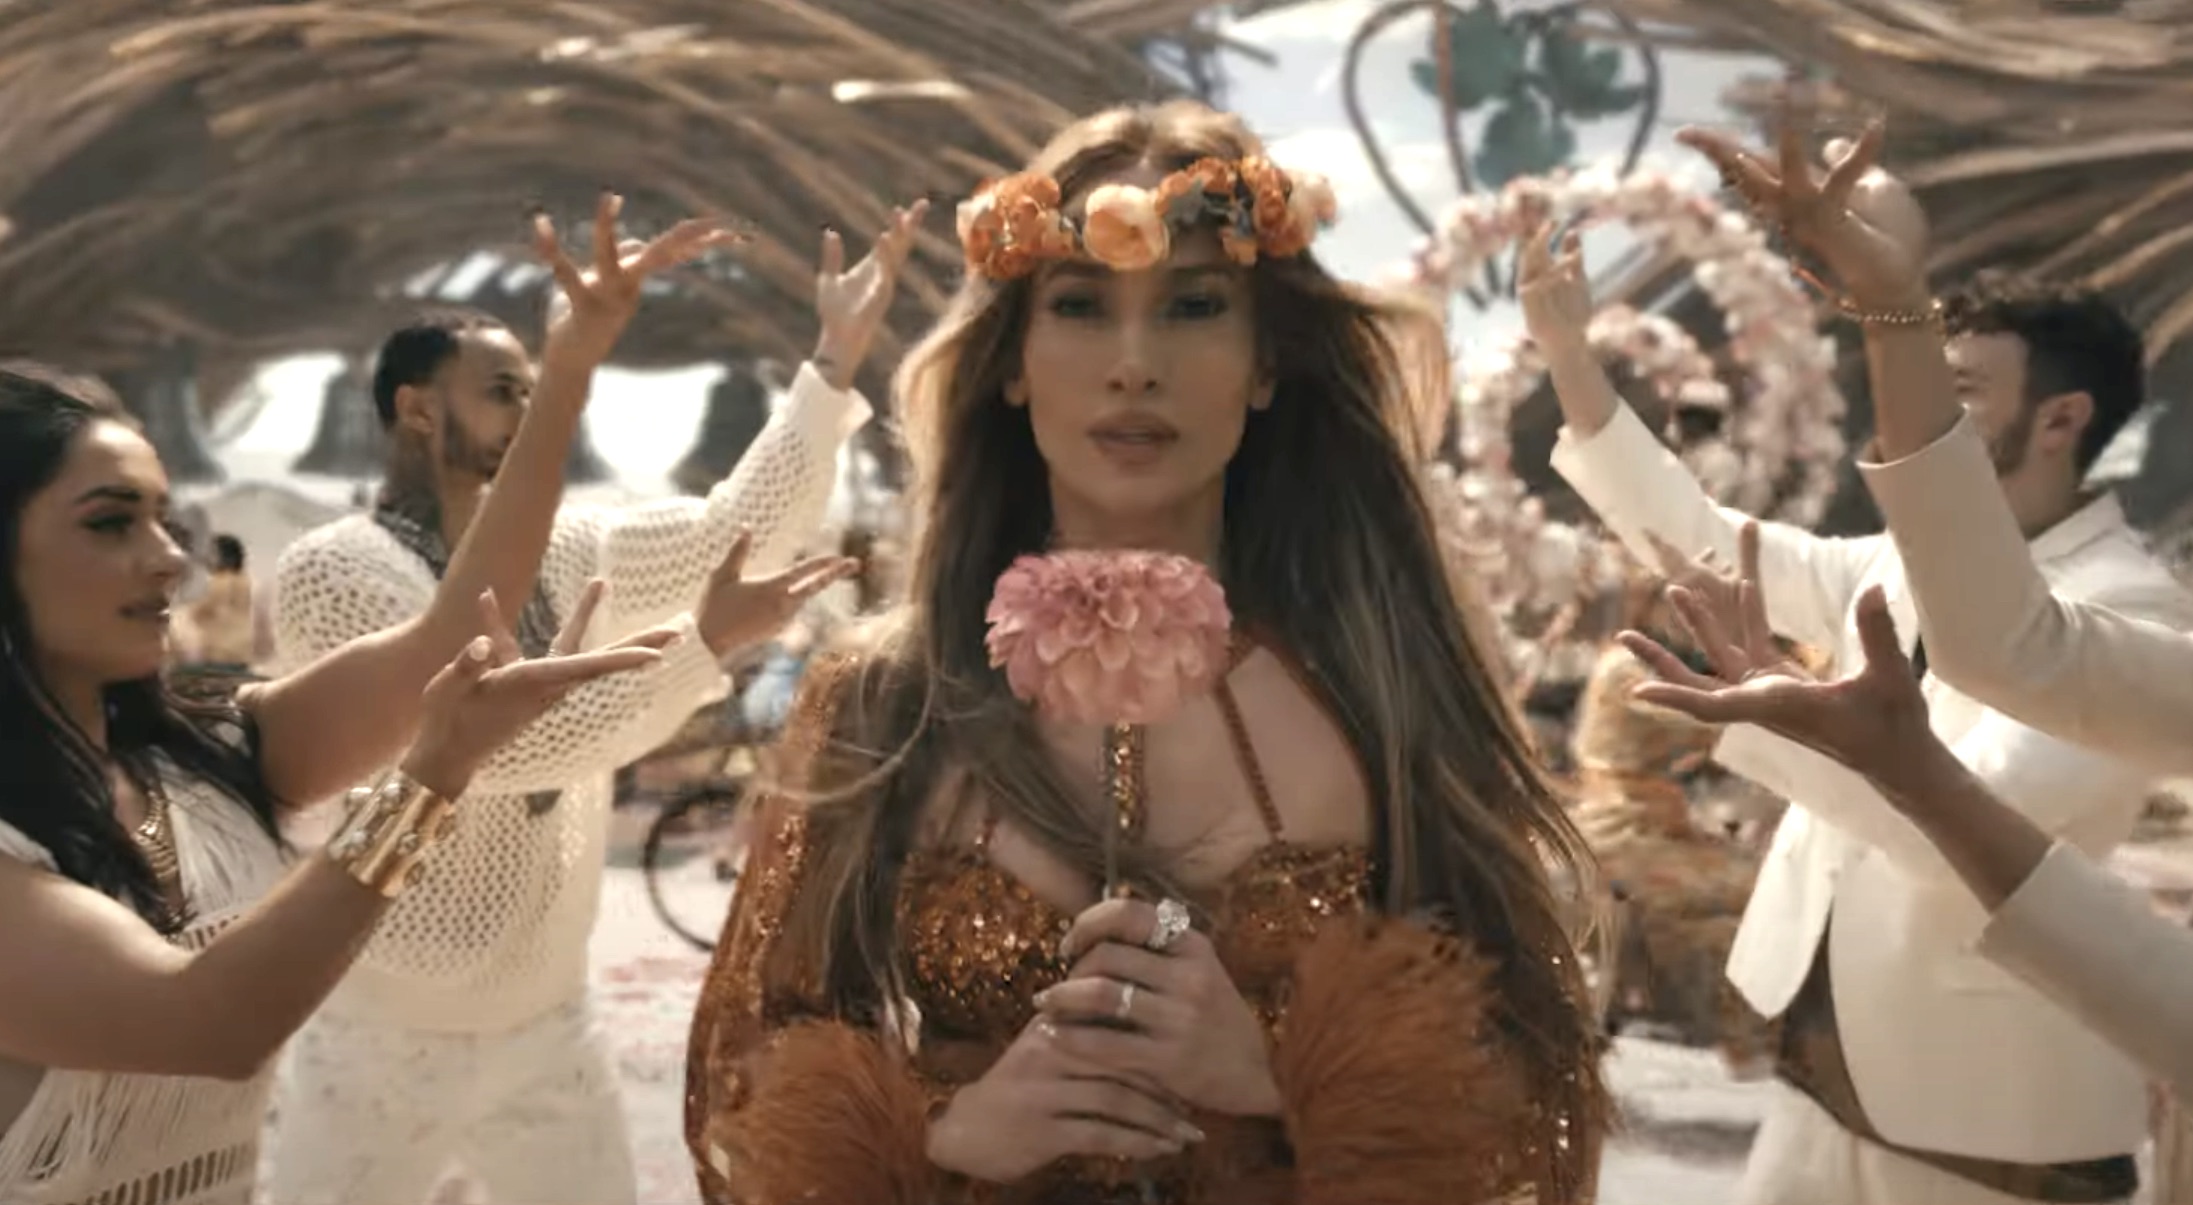 Jennifer Lopez Unleashes Star-Studded ‘This Is Me…Now’ Visual Album Trailer